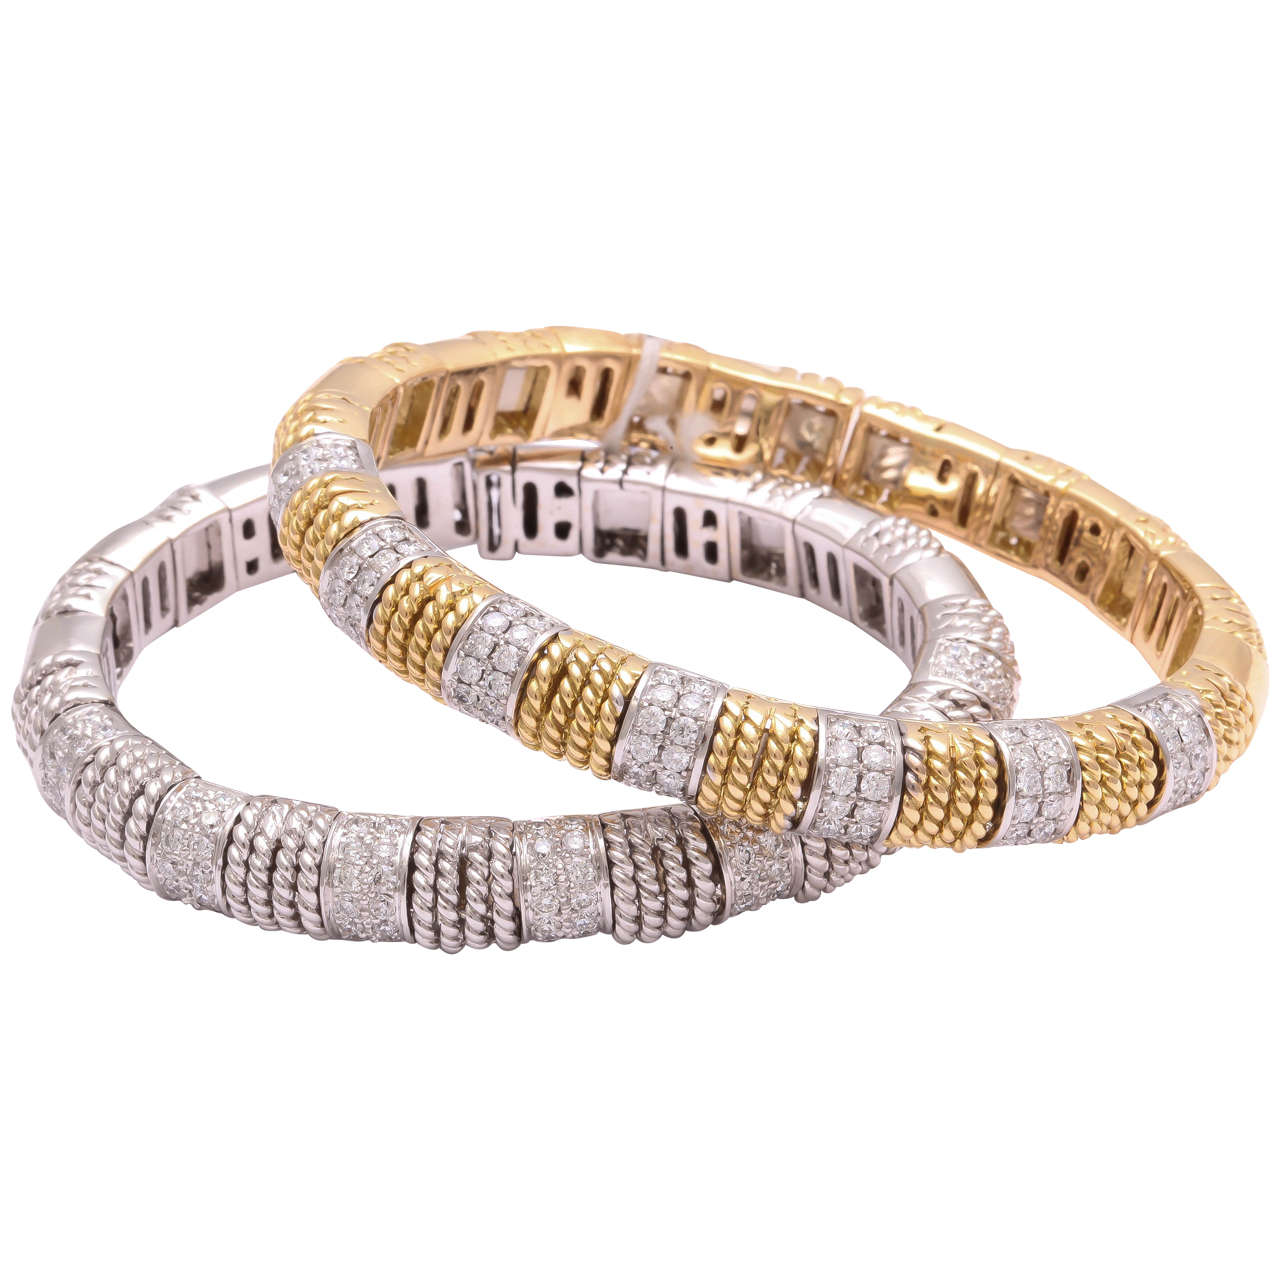 White and Yellow Gold Diamond Bracelets For Sale